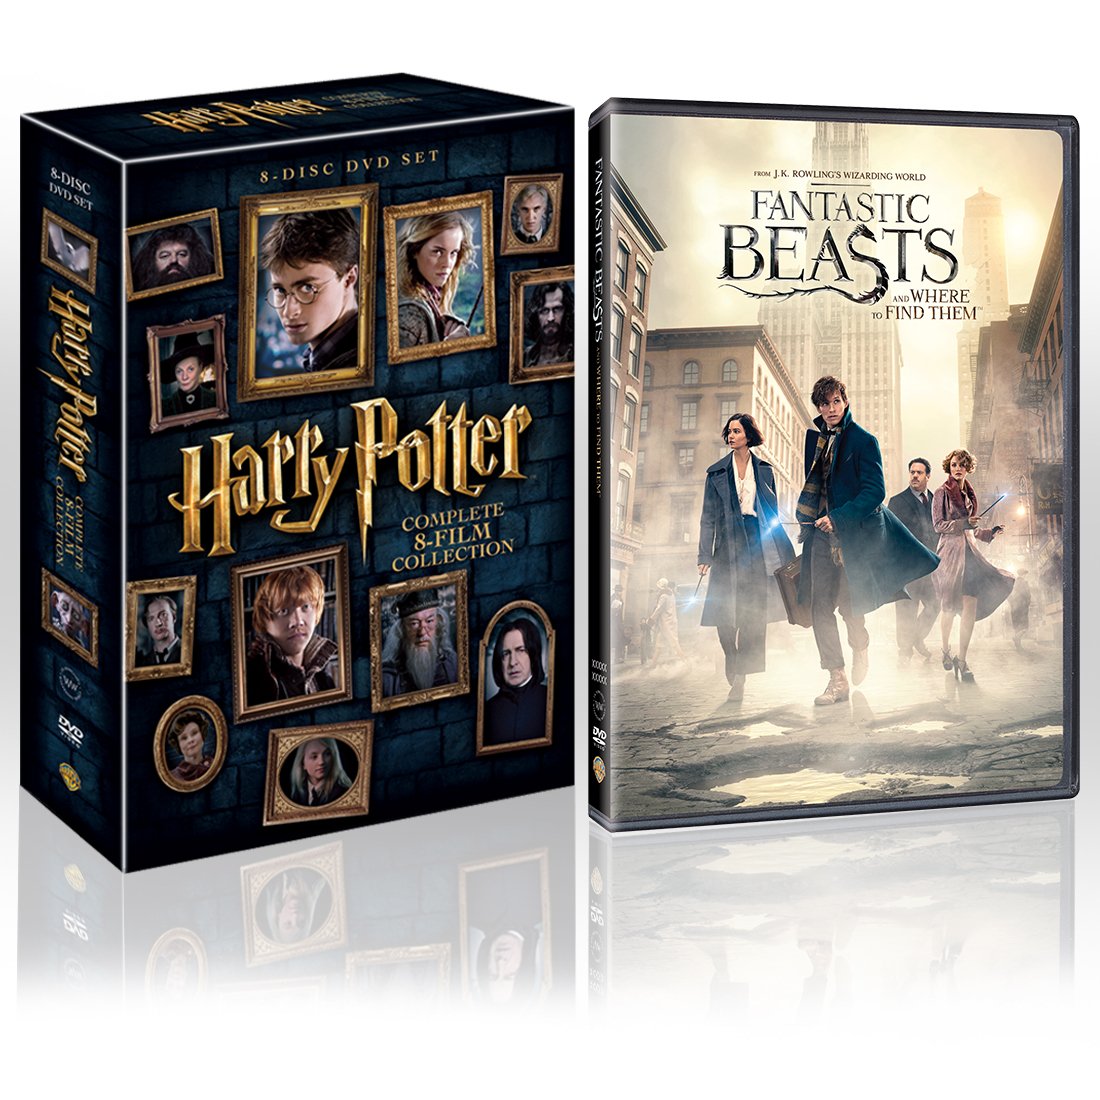 harry-potter-the-complete-8-film-box-set-fantastic-beasts-and-where-to-find-them-9-discs